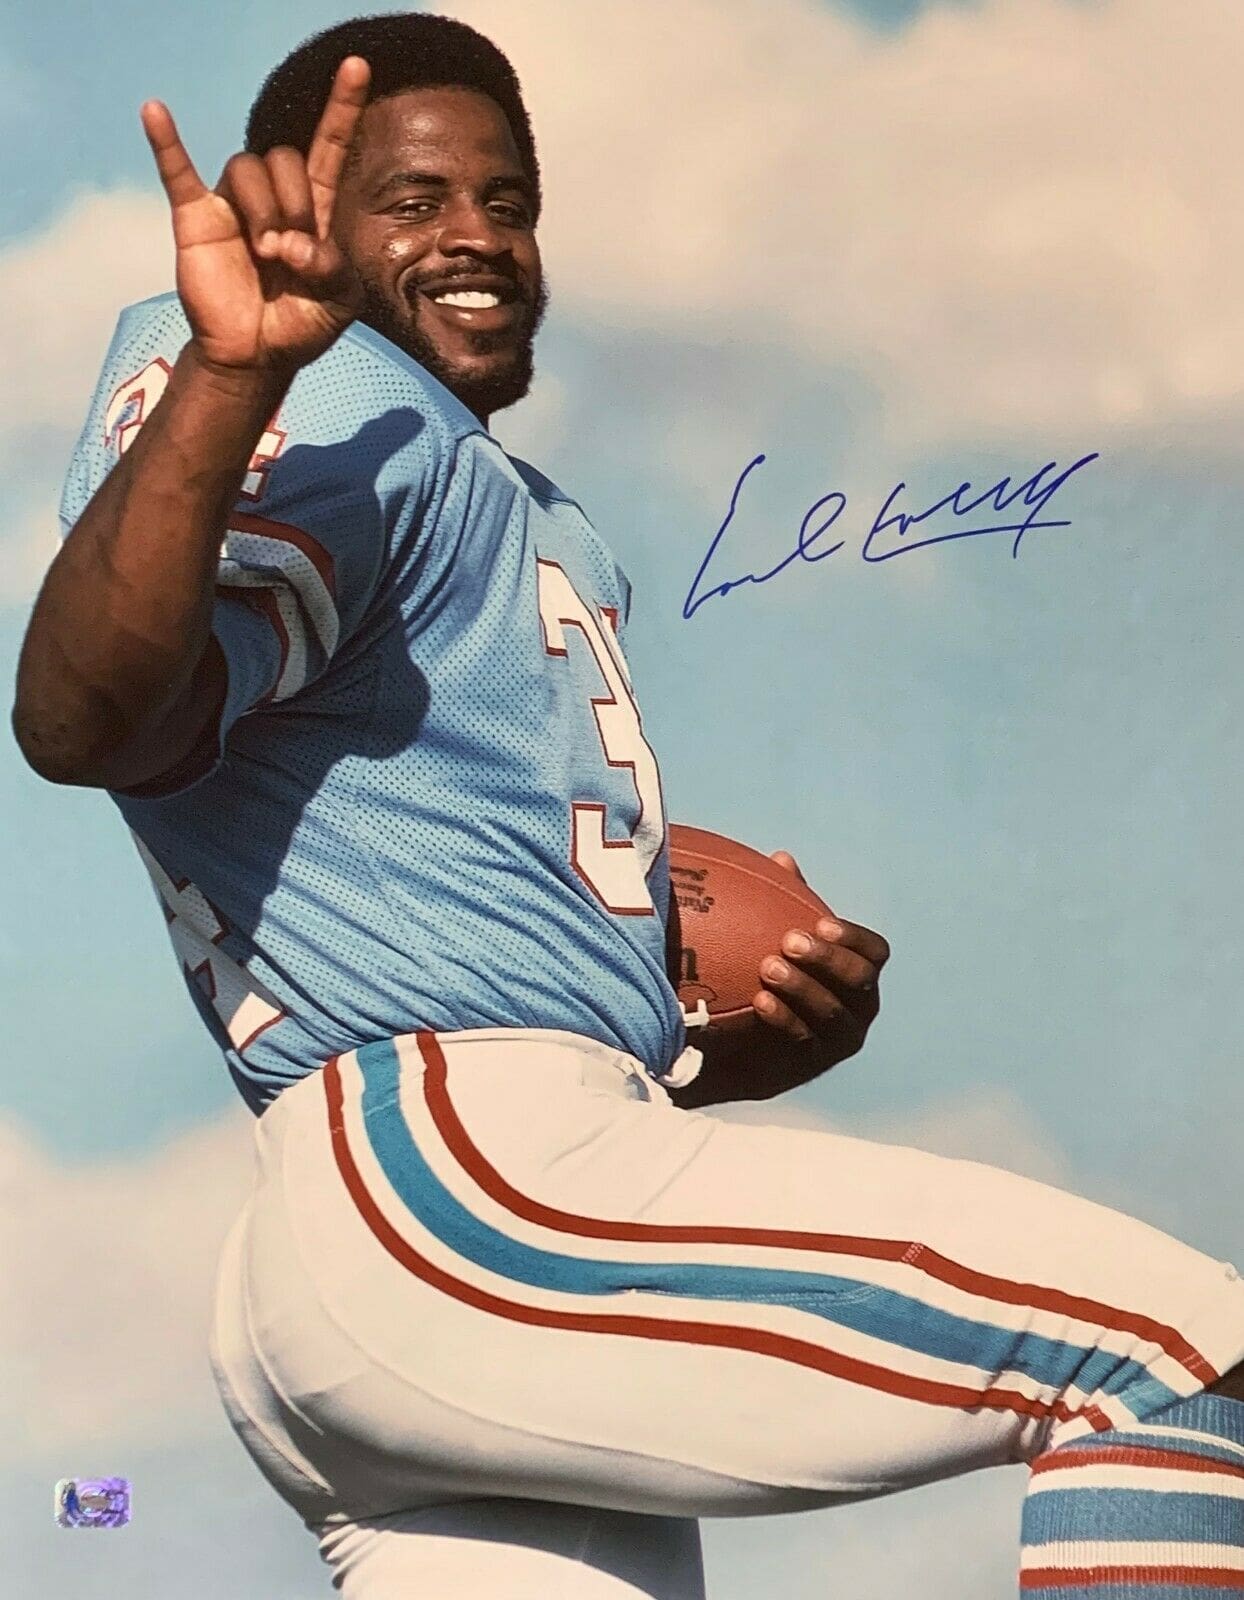 Earl Campbell Autographed Houston Oilers Jersey Framed BAS Signed